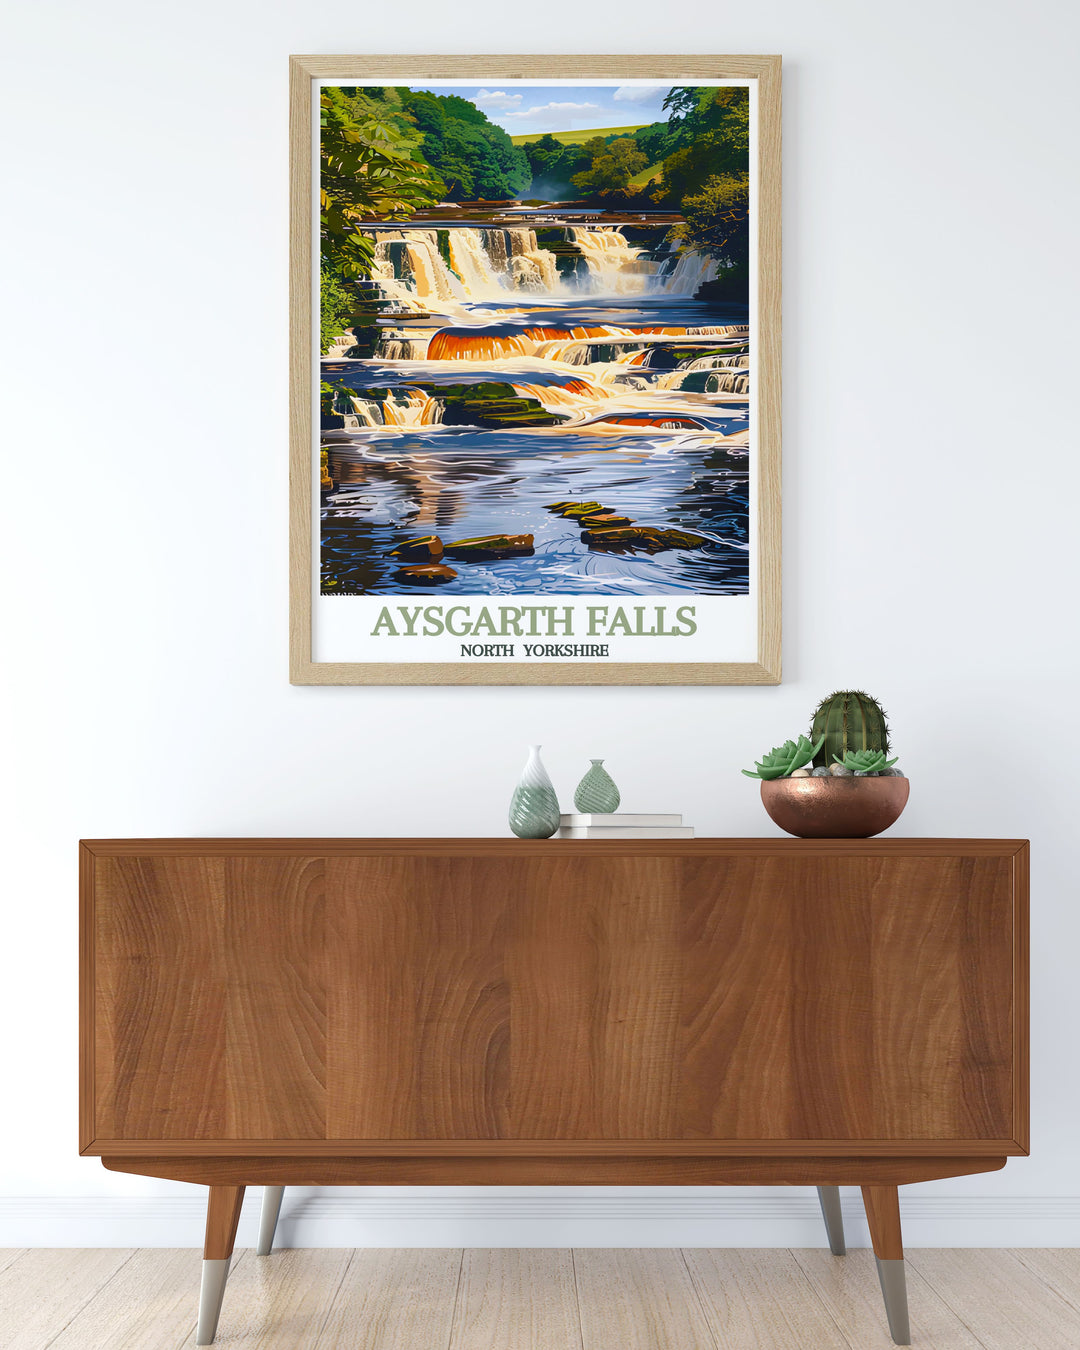 Vintage inspired poster of Aysgarth Falls highlighting the serene landscapes of North Yorkshire ideal for decorating living spaces with a touch of nature featuring the captivating falls of the Yorkshire Dales in a timeless retro style.